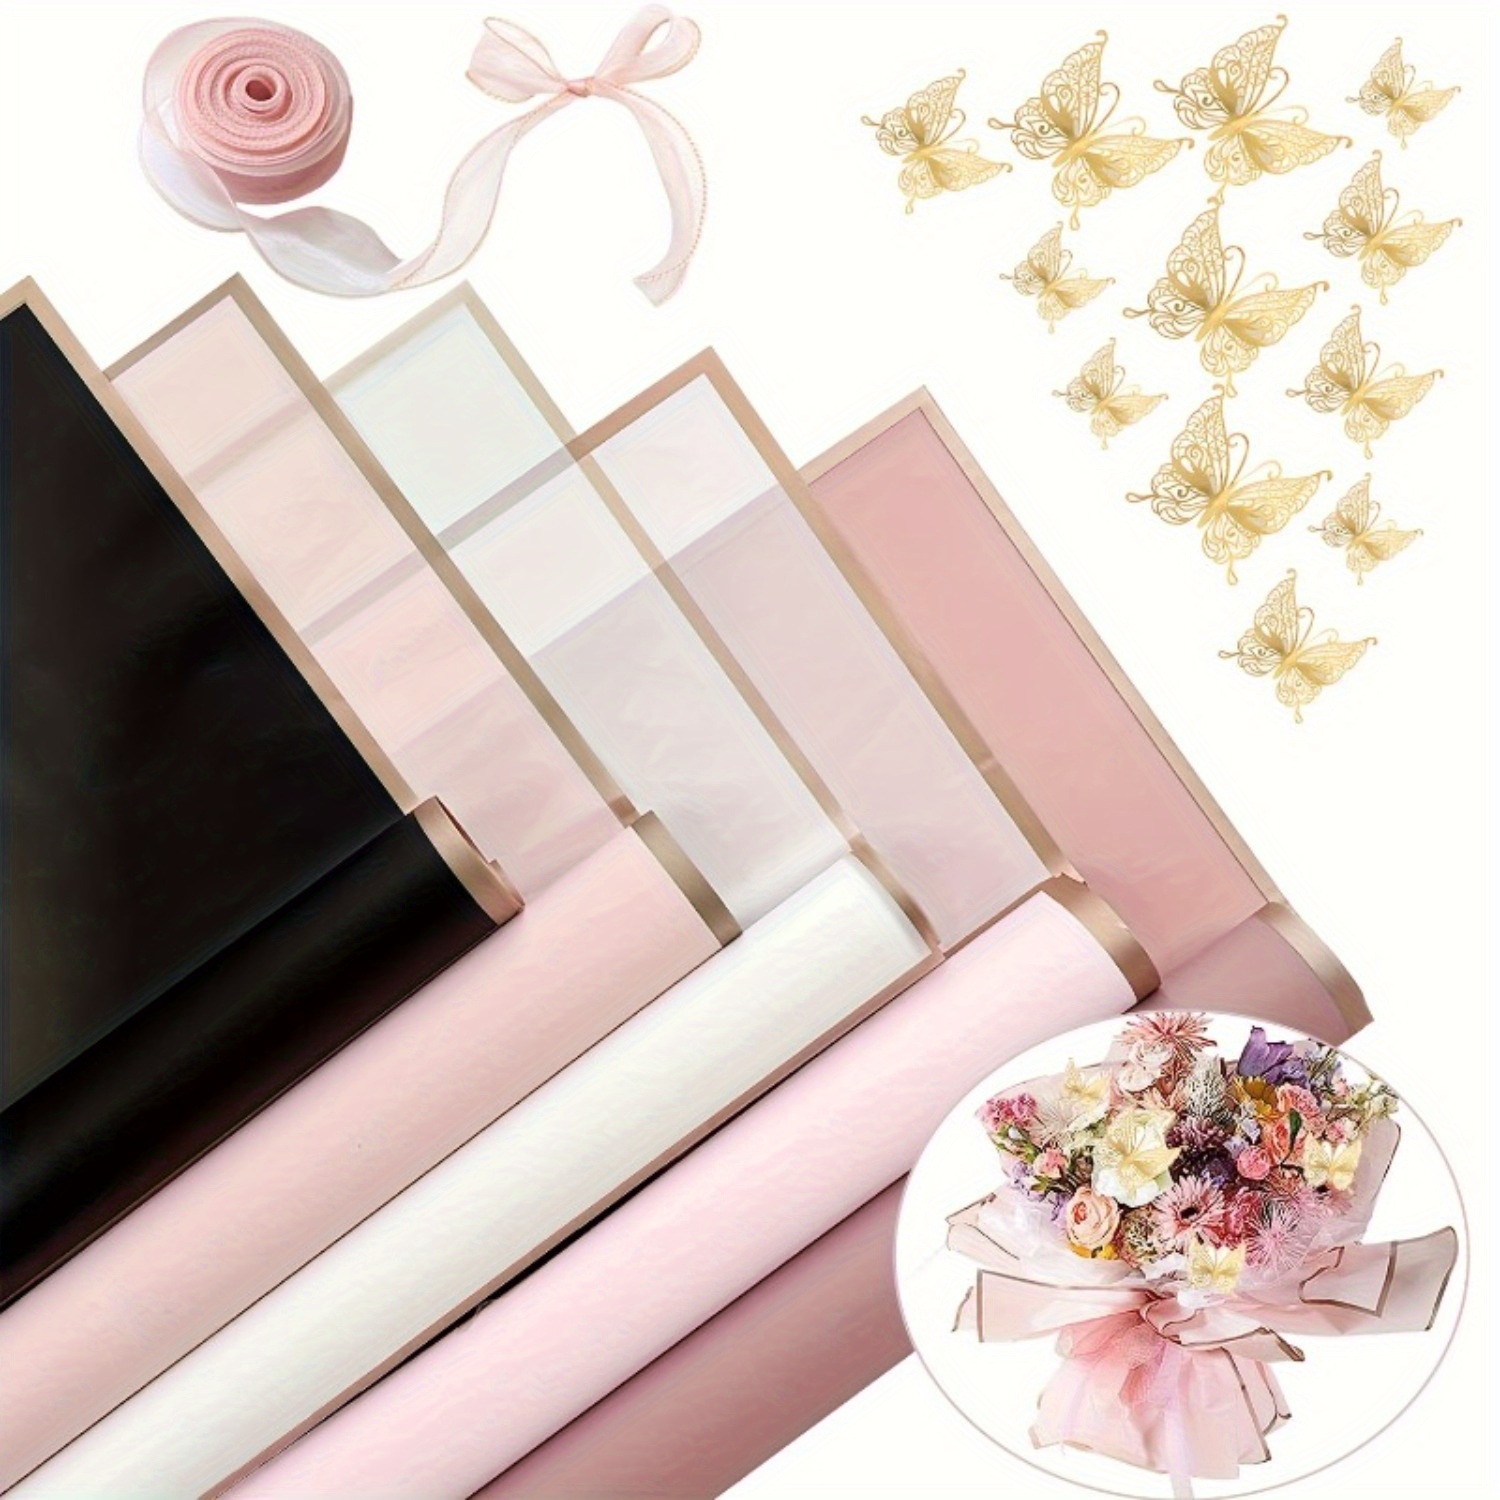 

38pcs/set, 25 Sheets Waterproof Multi-colored Flower Wrapping Paper, Florist Packaging Paper, 12pcs 3d Butterflies And 1pc Ribbon For Mother Father's Day Wedding Birthday Flower Shop Diy Craft